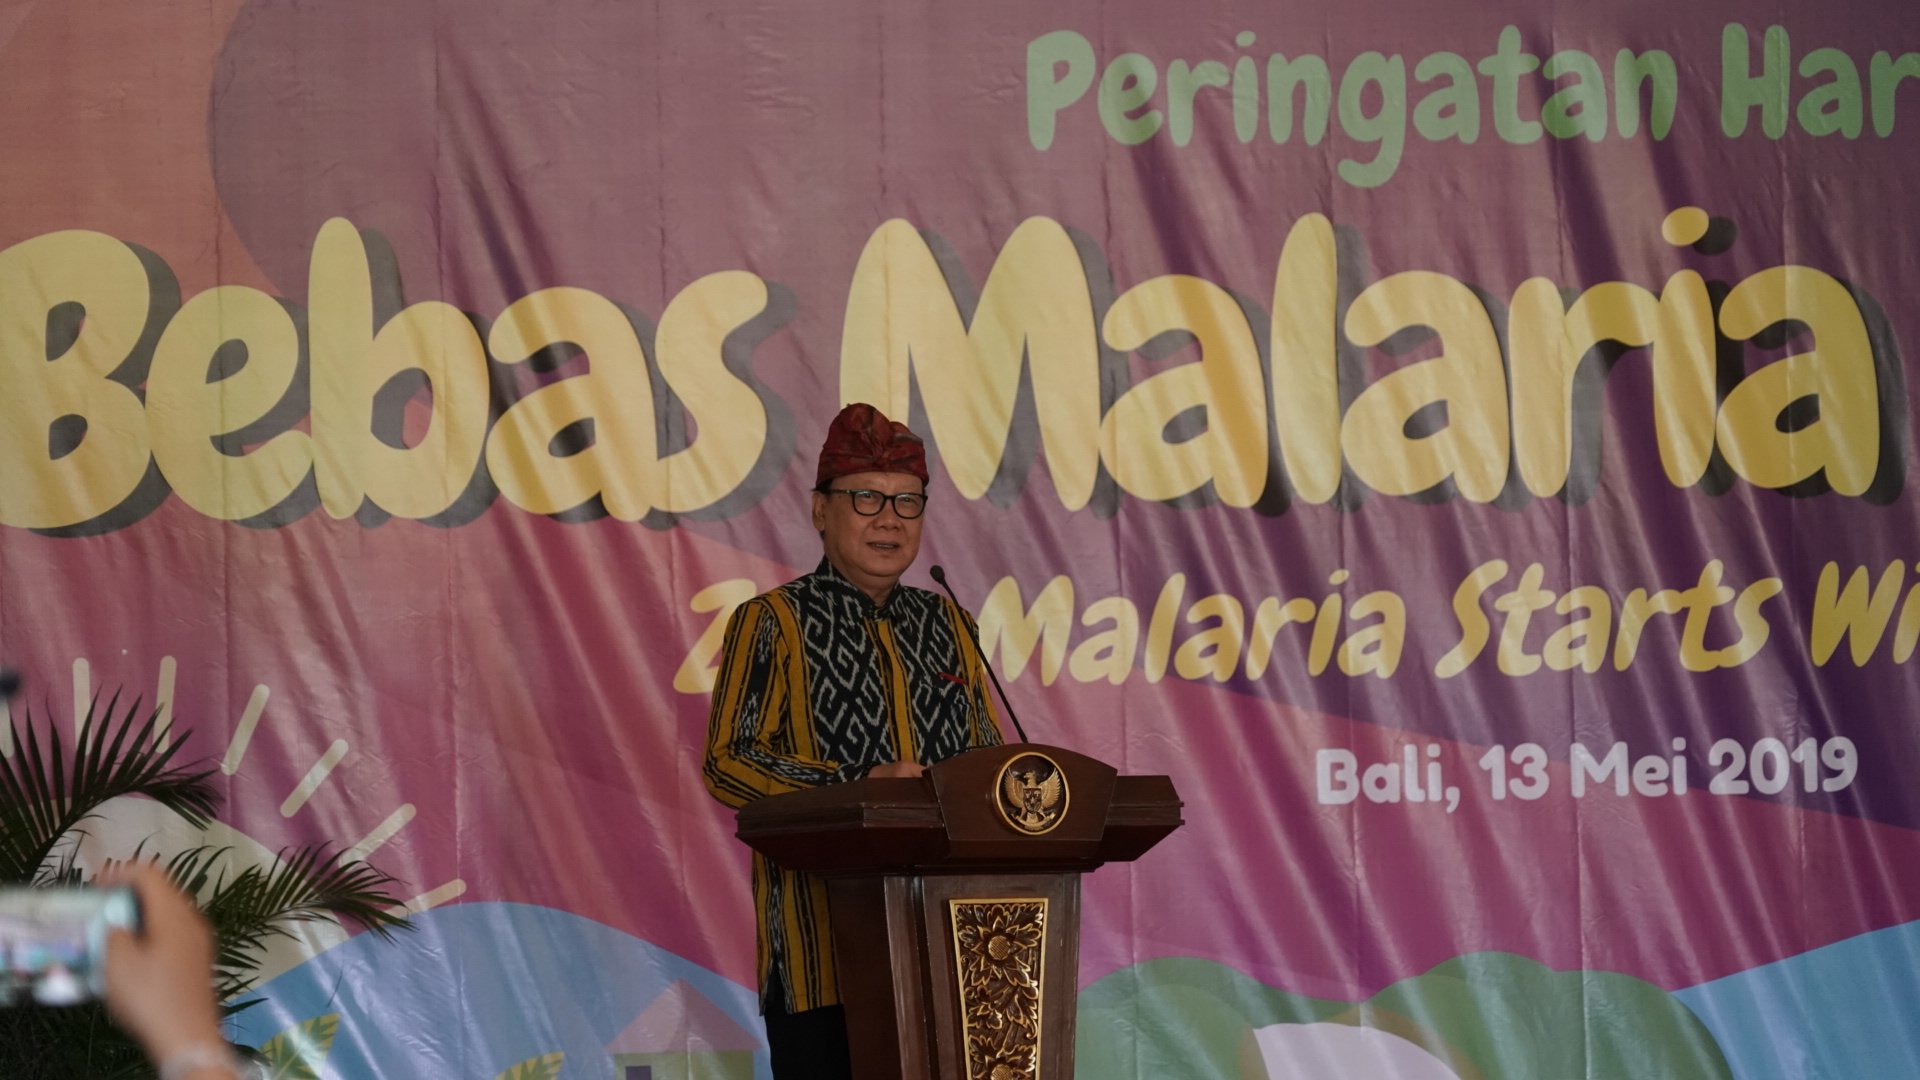 Indonesia observes World Malaria Day in Bali on May 13, aims to eradicate the disease nationwide by 2030. Photo: KemenkesRI / Twitter